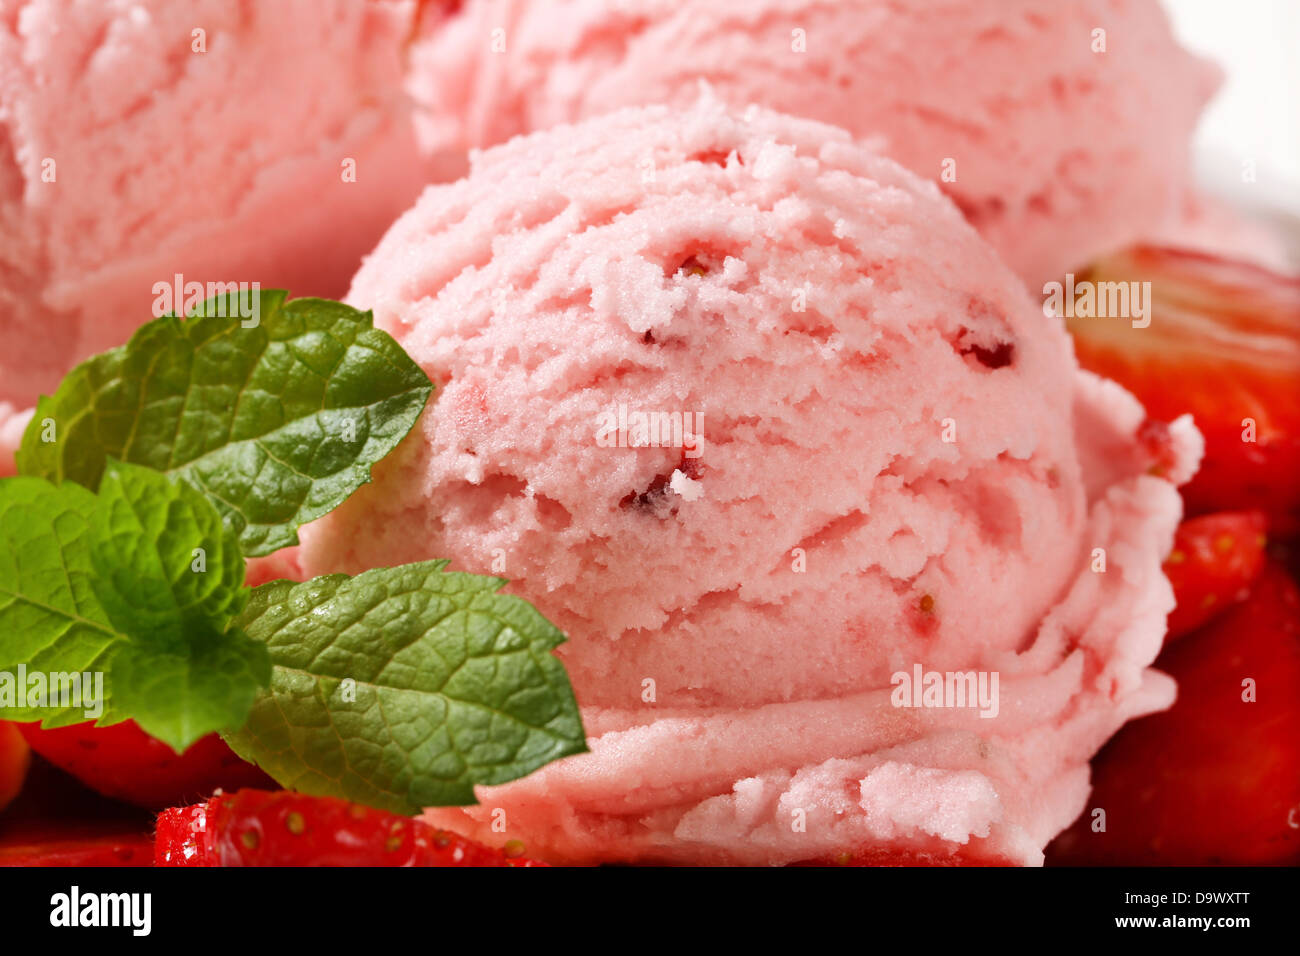 Scoops of strawberry sherbet - detail Stock Photo